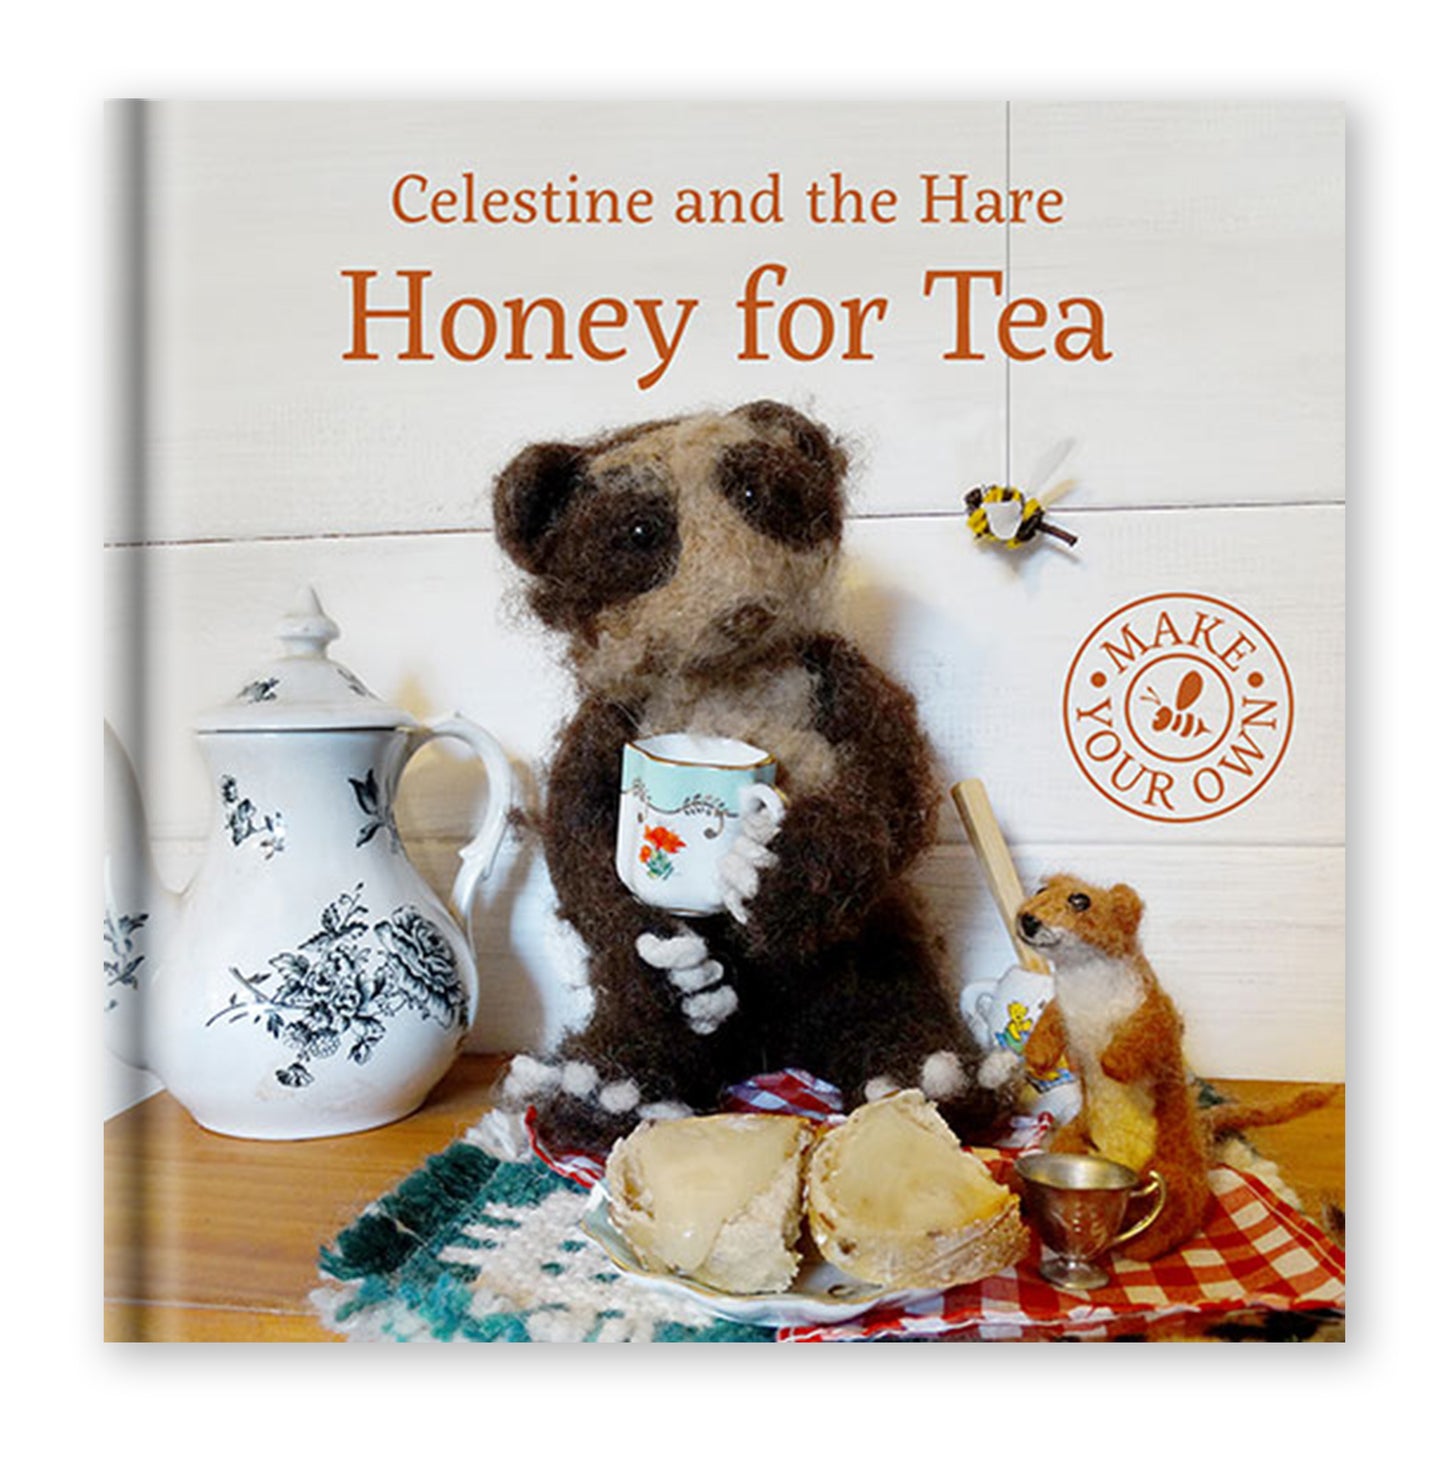 Honey for Tea - Celestine and the Hare by Karin Celestine, published by Graffeg